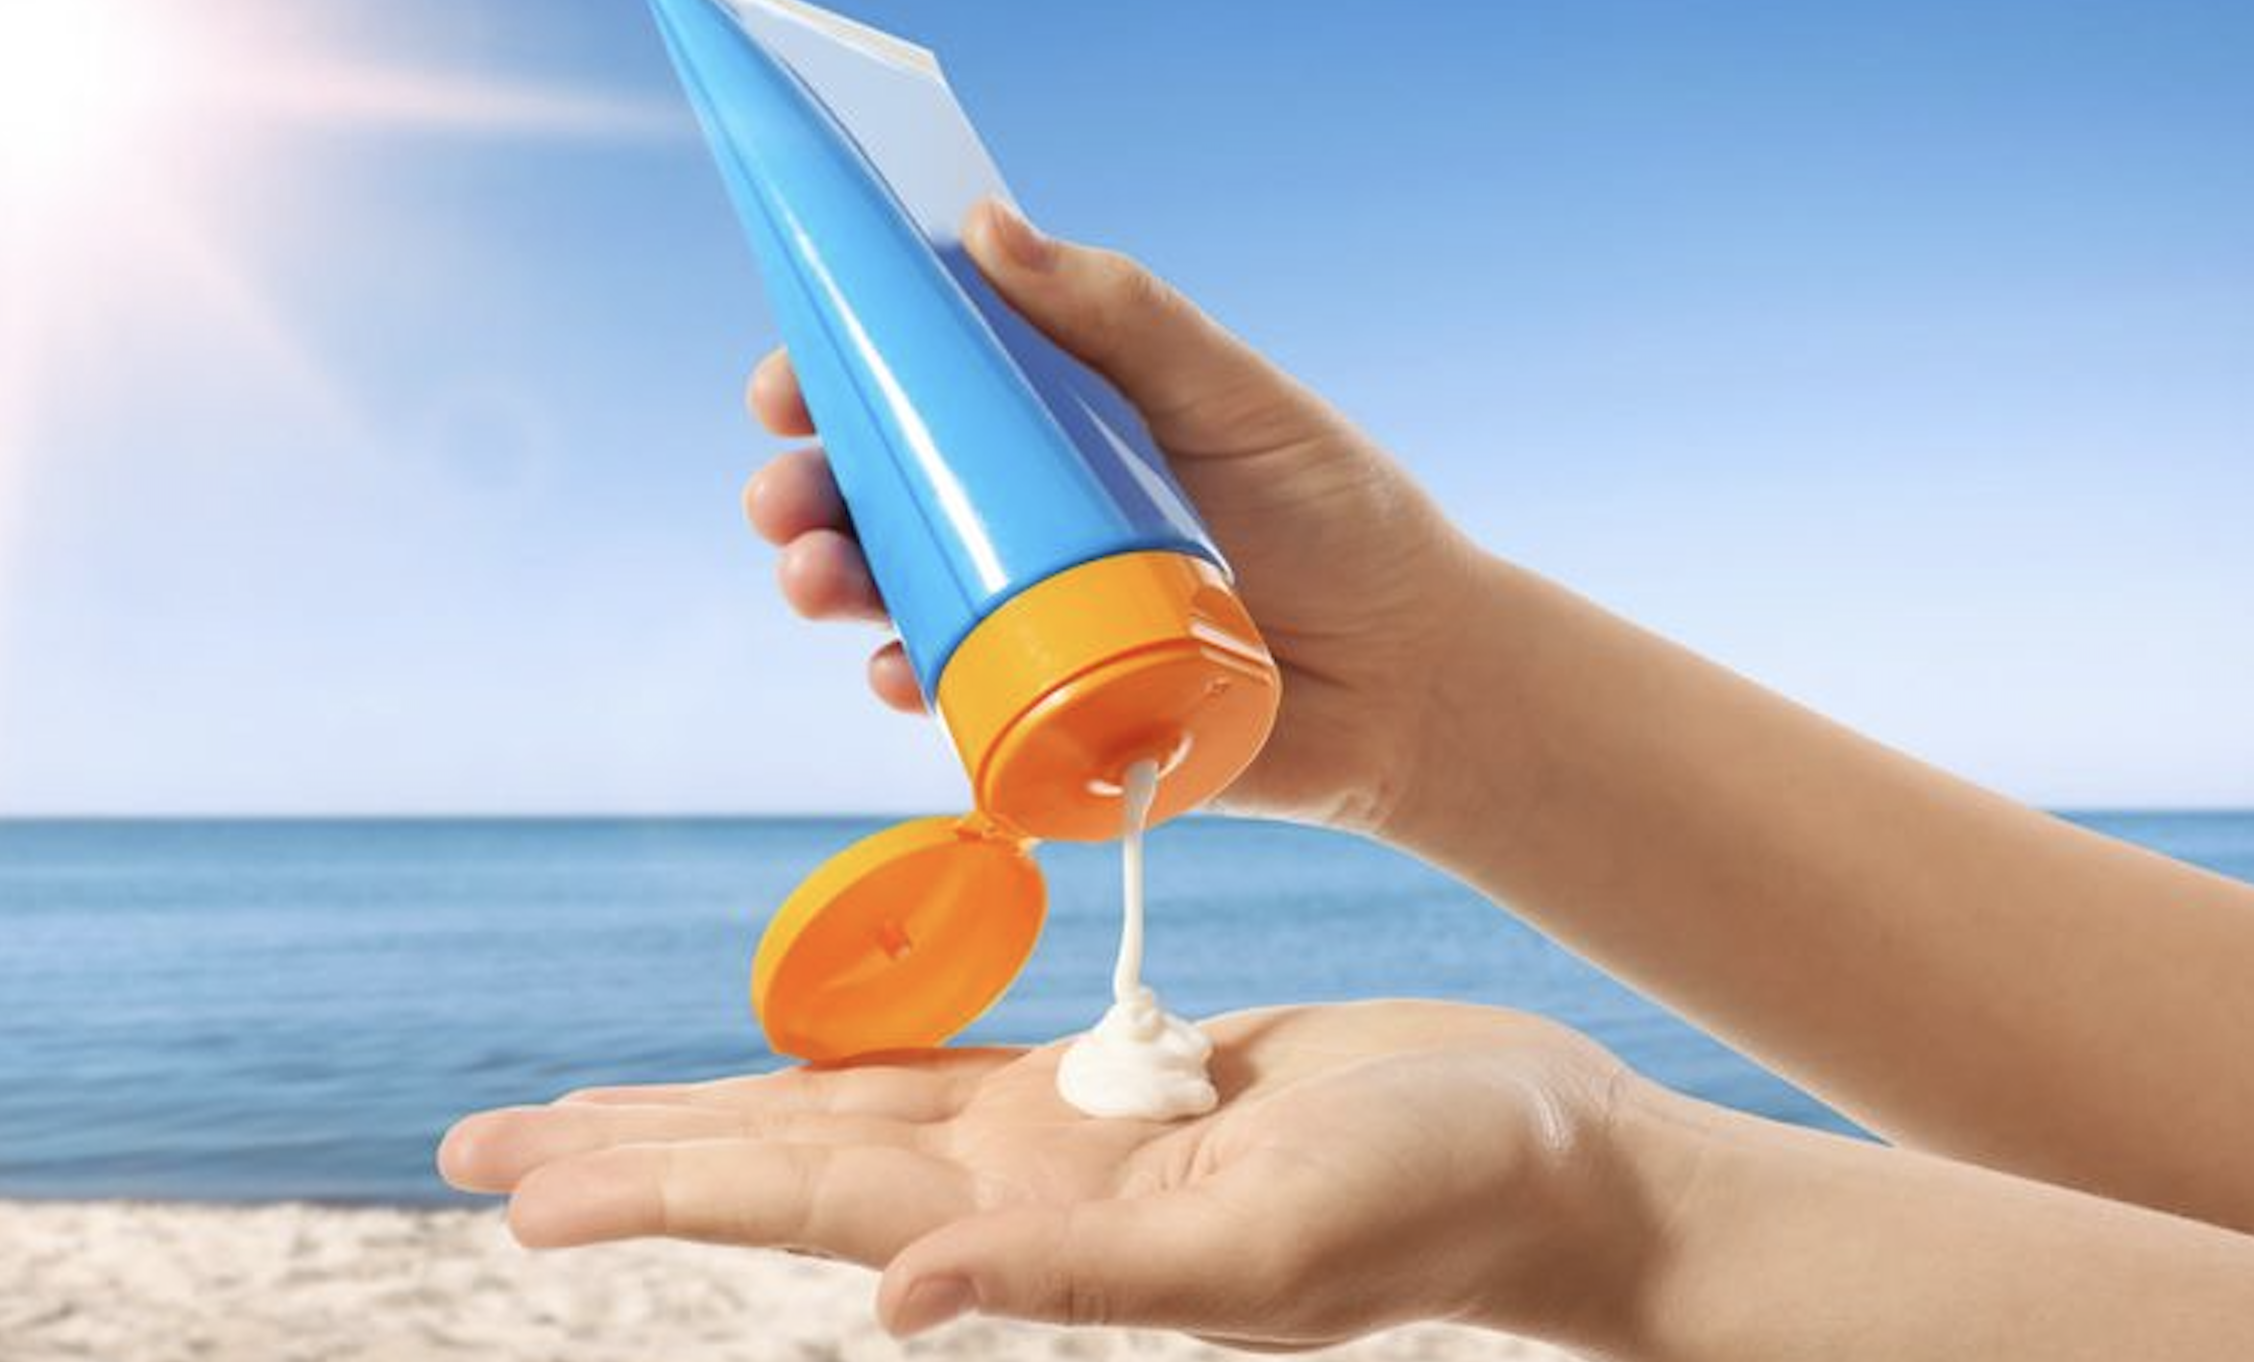 Do sunscreen creams really protect us from harmful rays of the sun?